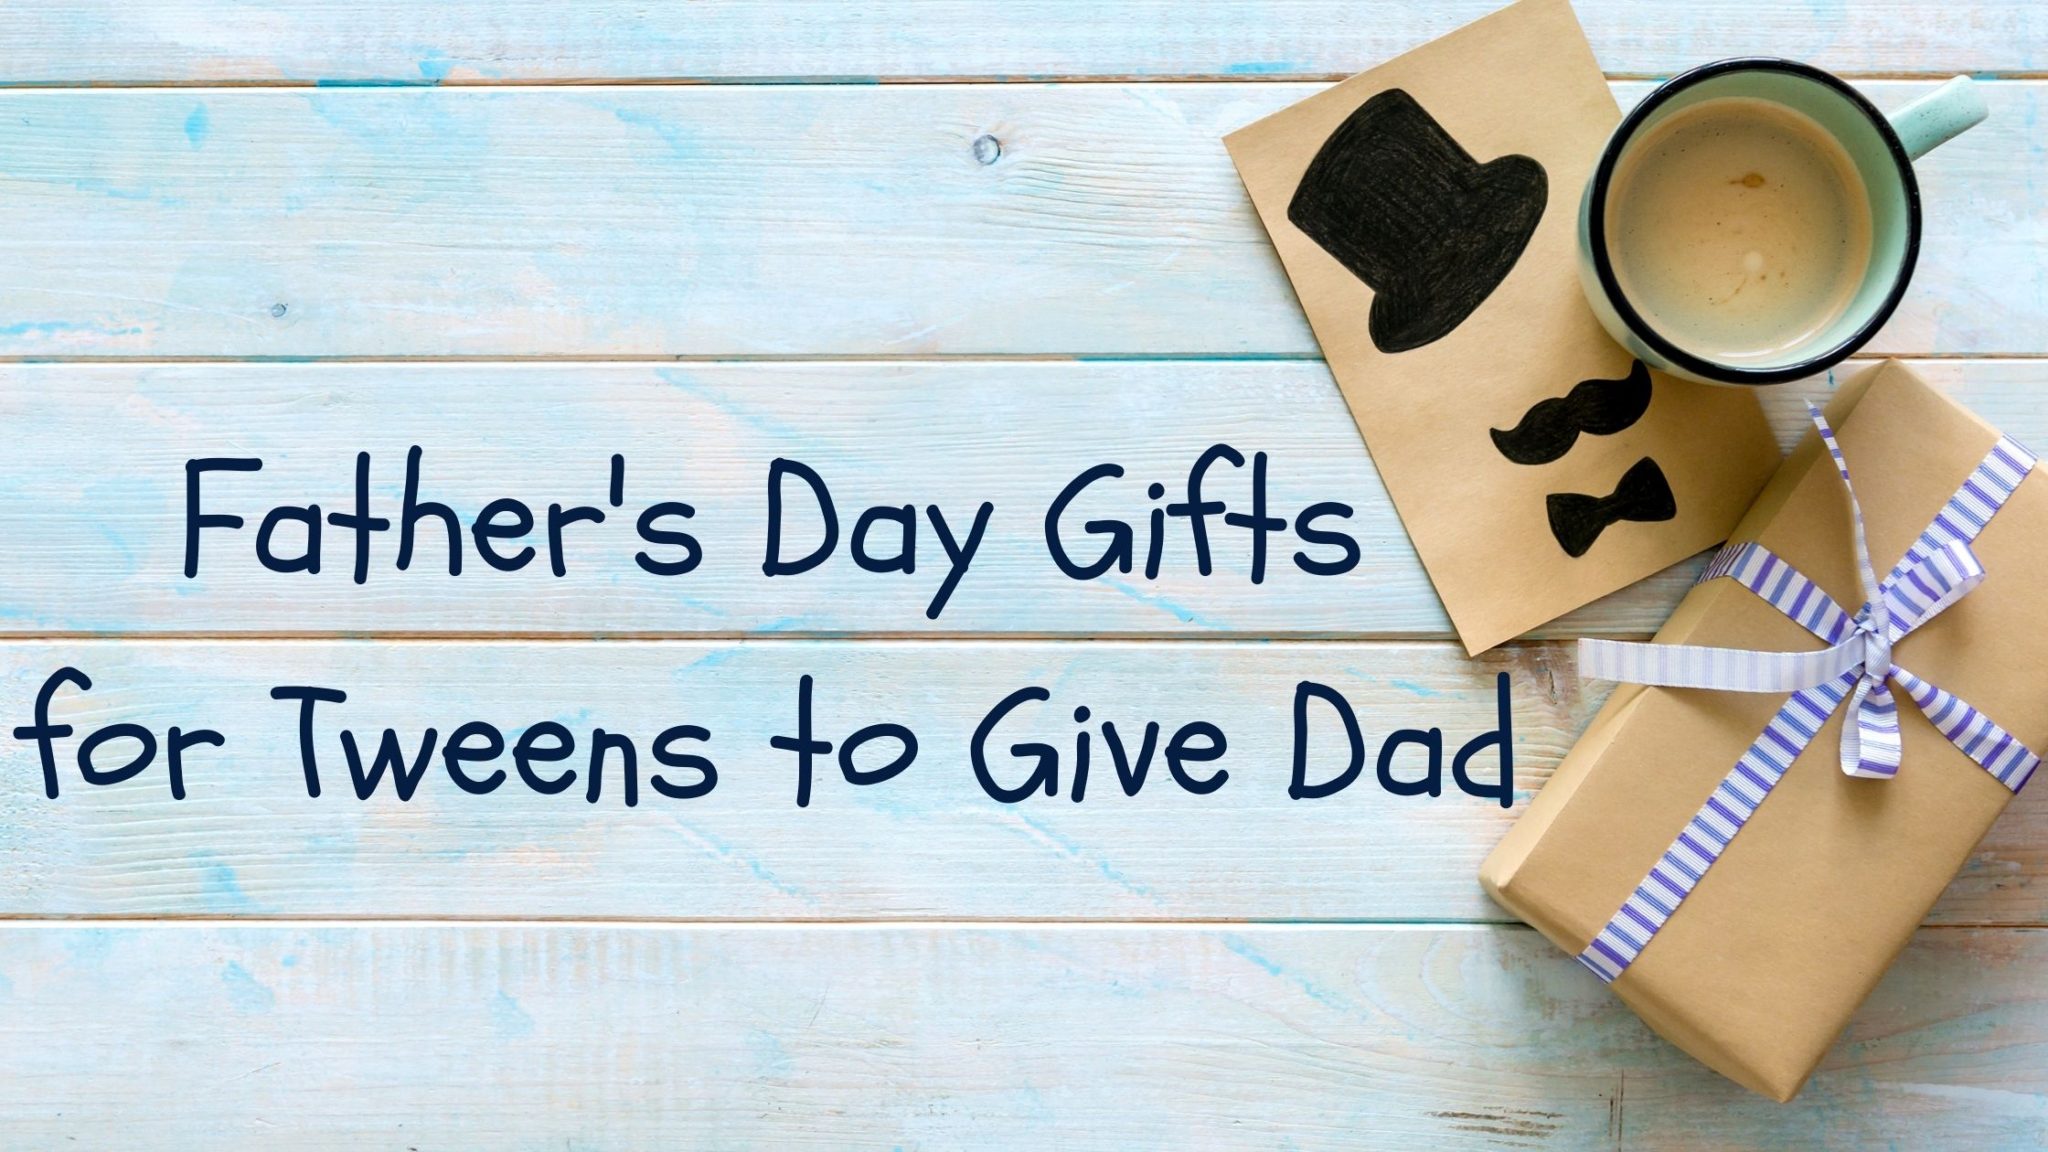 Father's Day Gifts for Tweens to Give Dad - The Secret Life of Homeschoolers